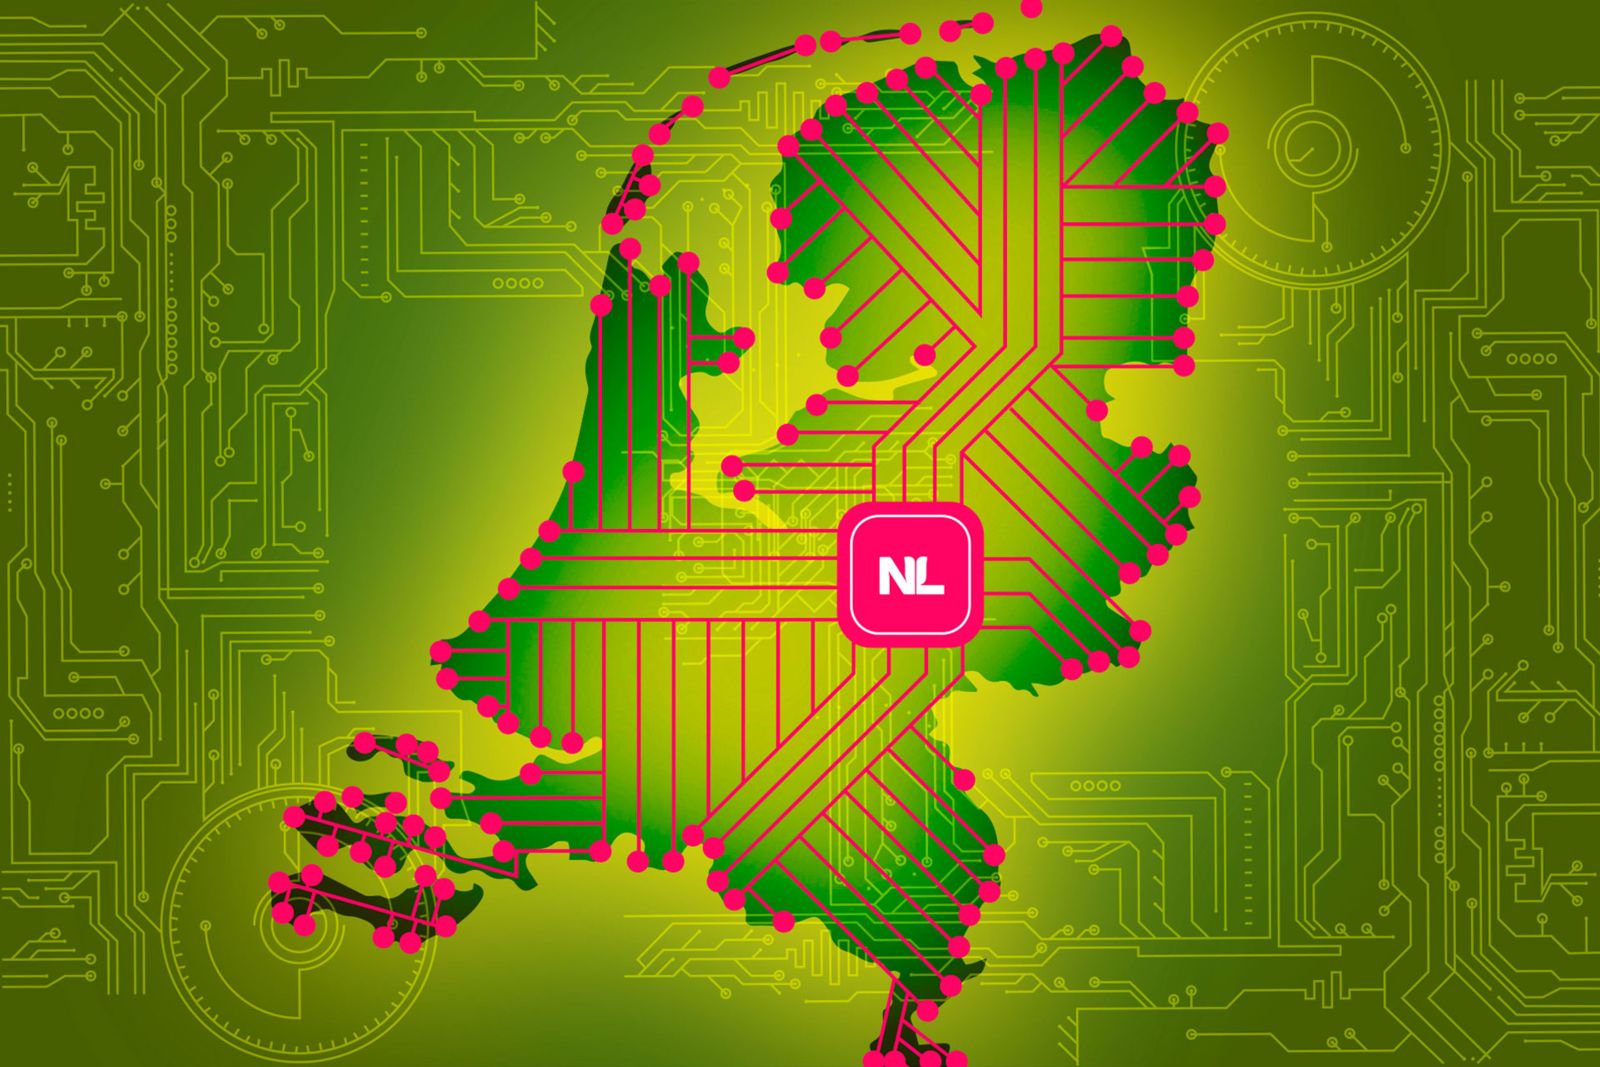 Landmark judgment from the Netherlands on digital welfare states and human rights